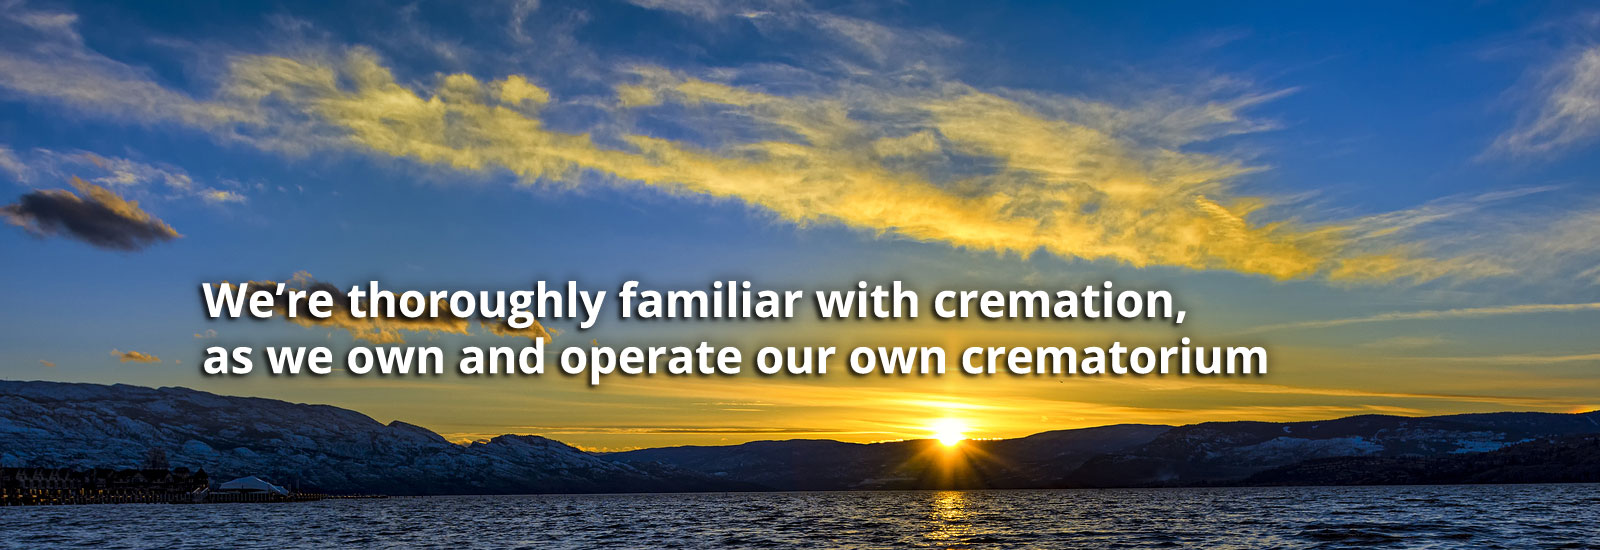 We're thoroughly familiar with cremation, as we own and operate or own crematorium